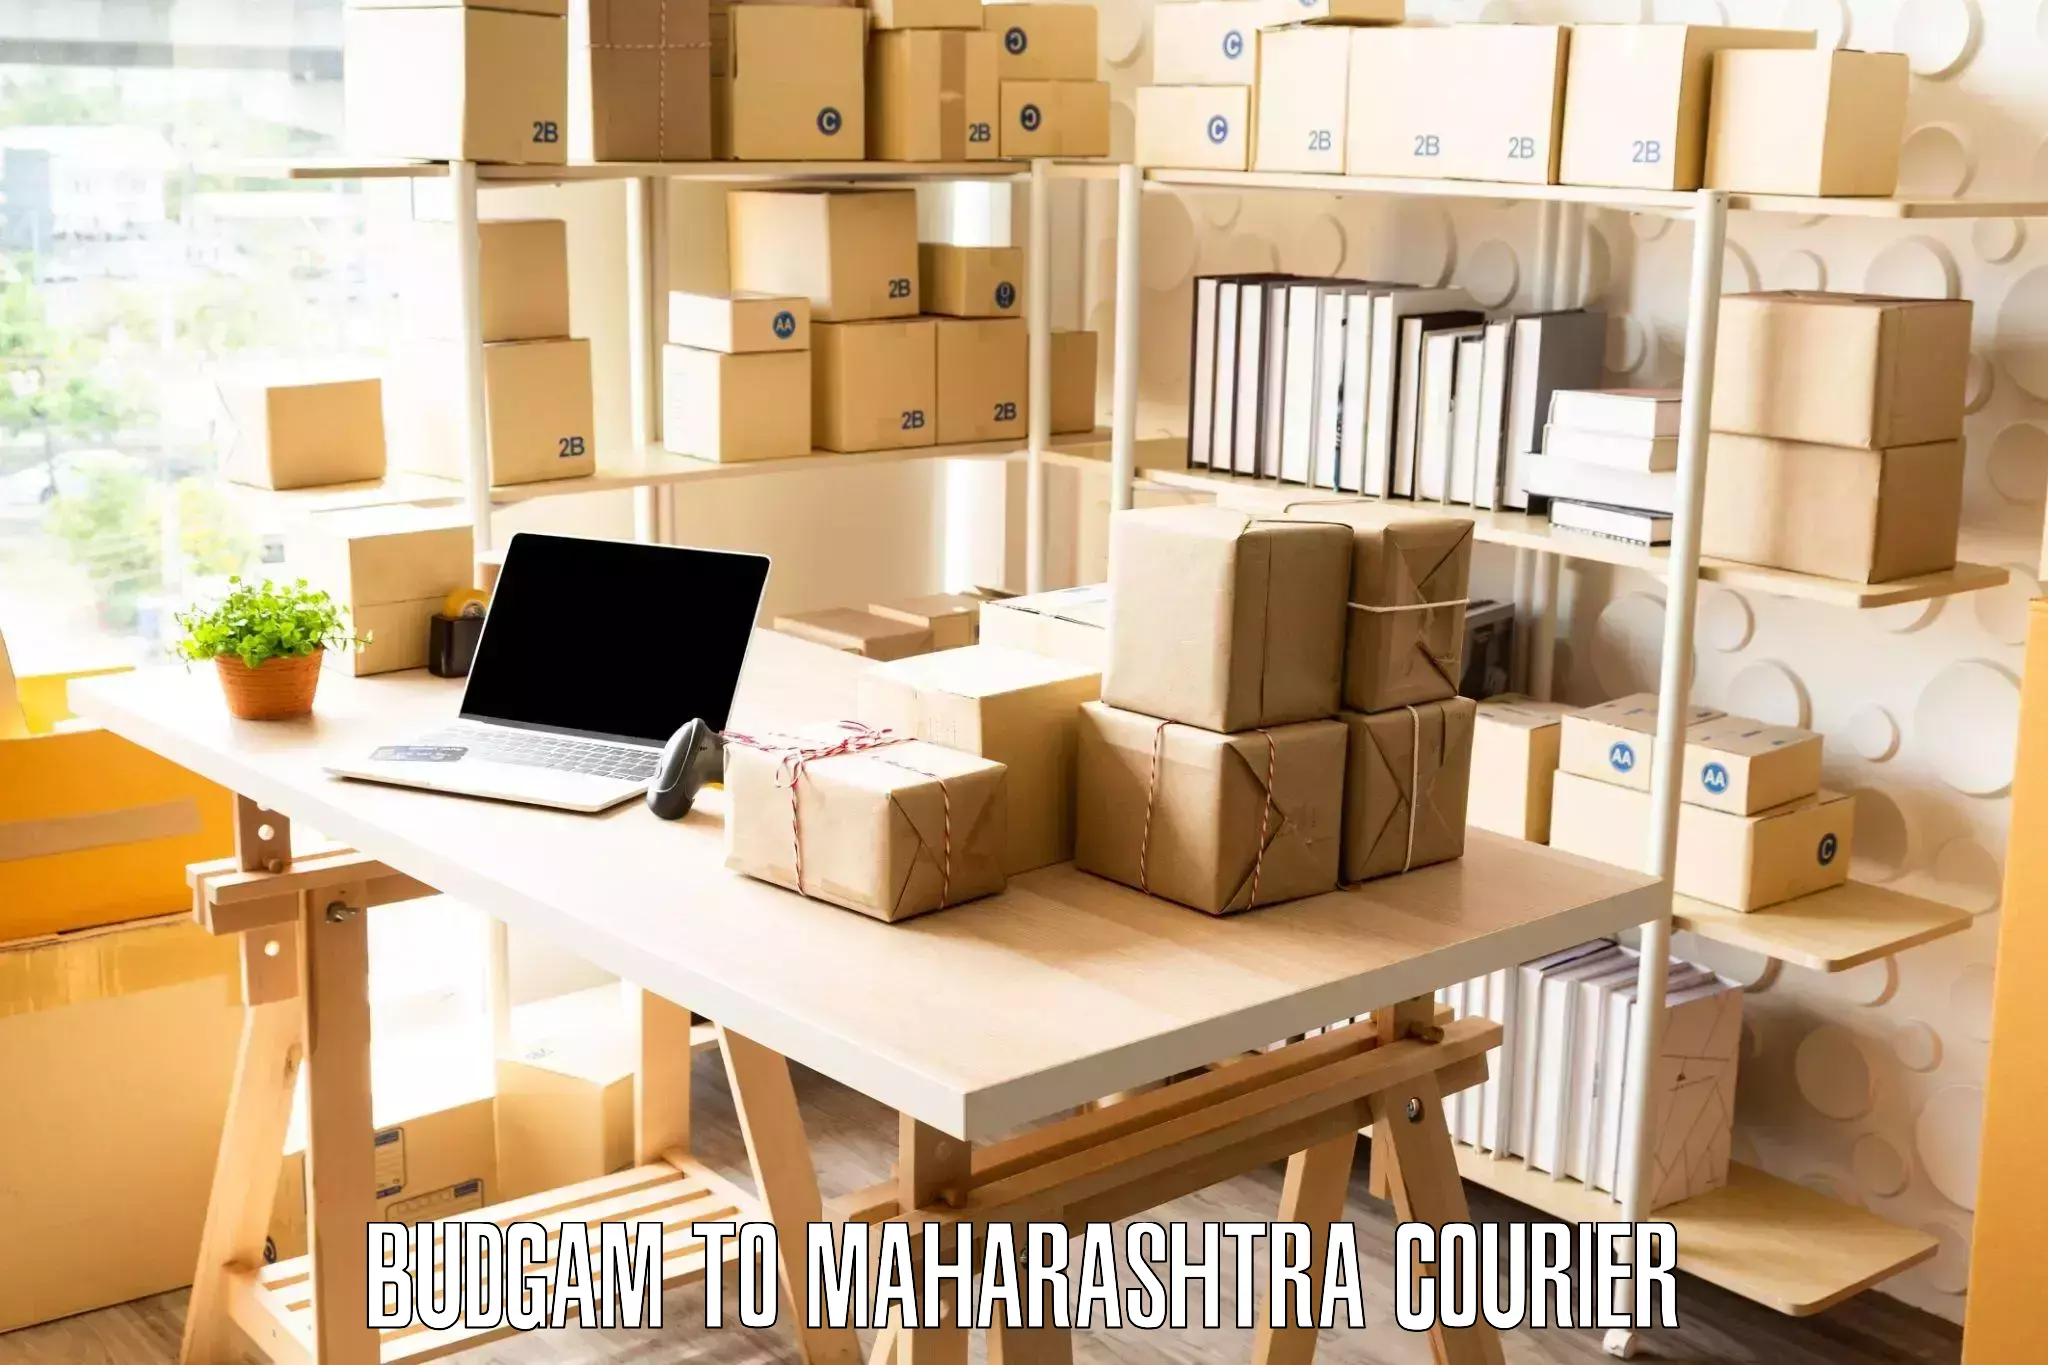 Quality moving services in Budgam to Maharashtra